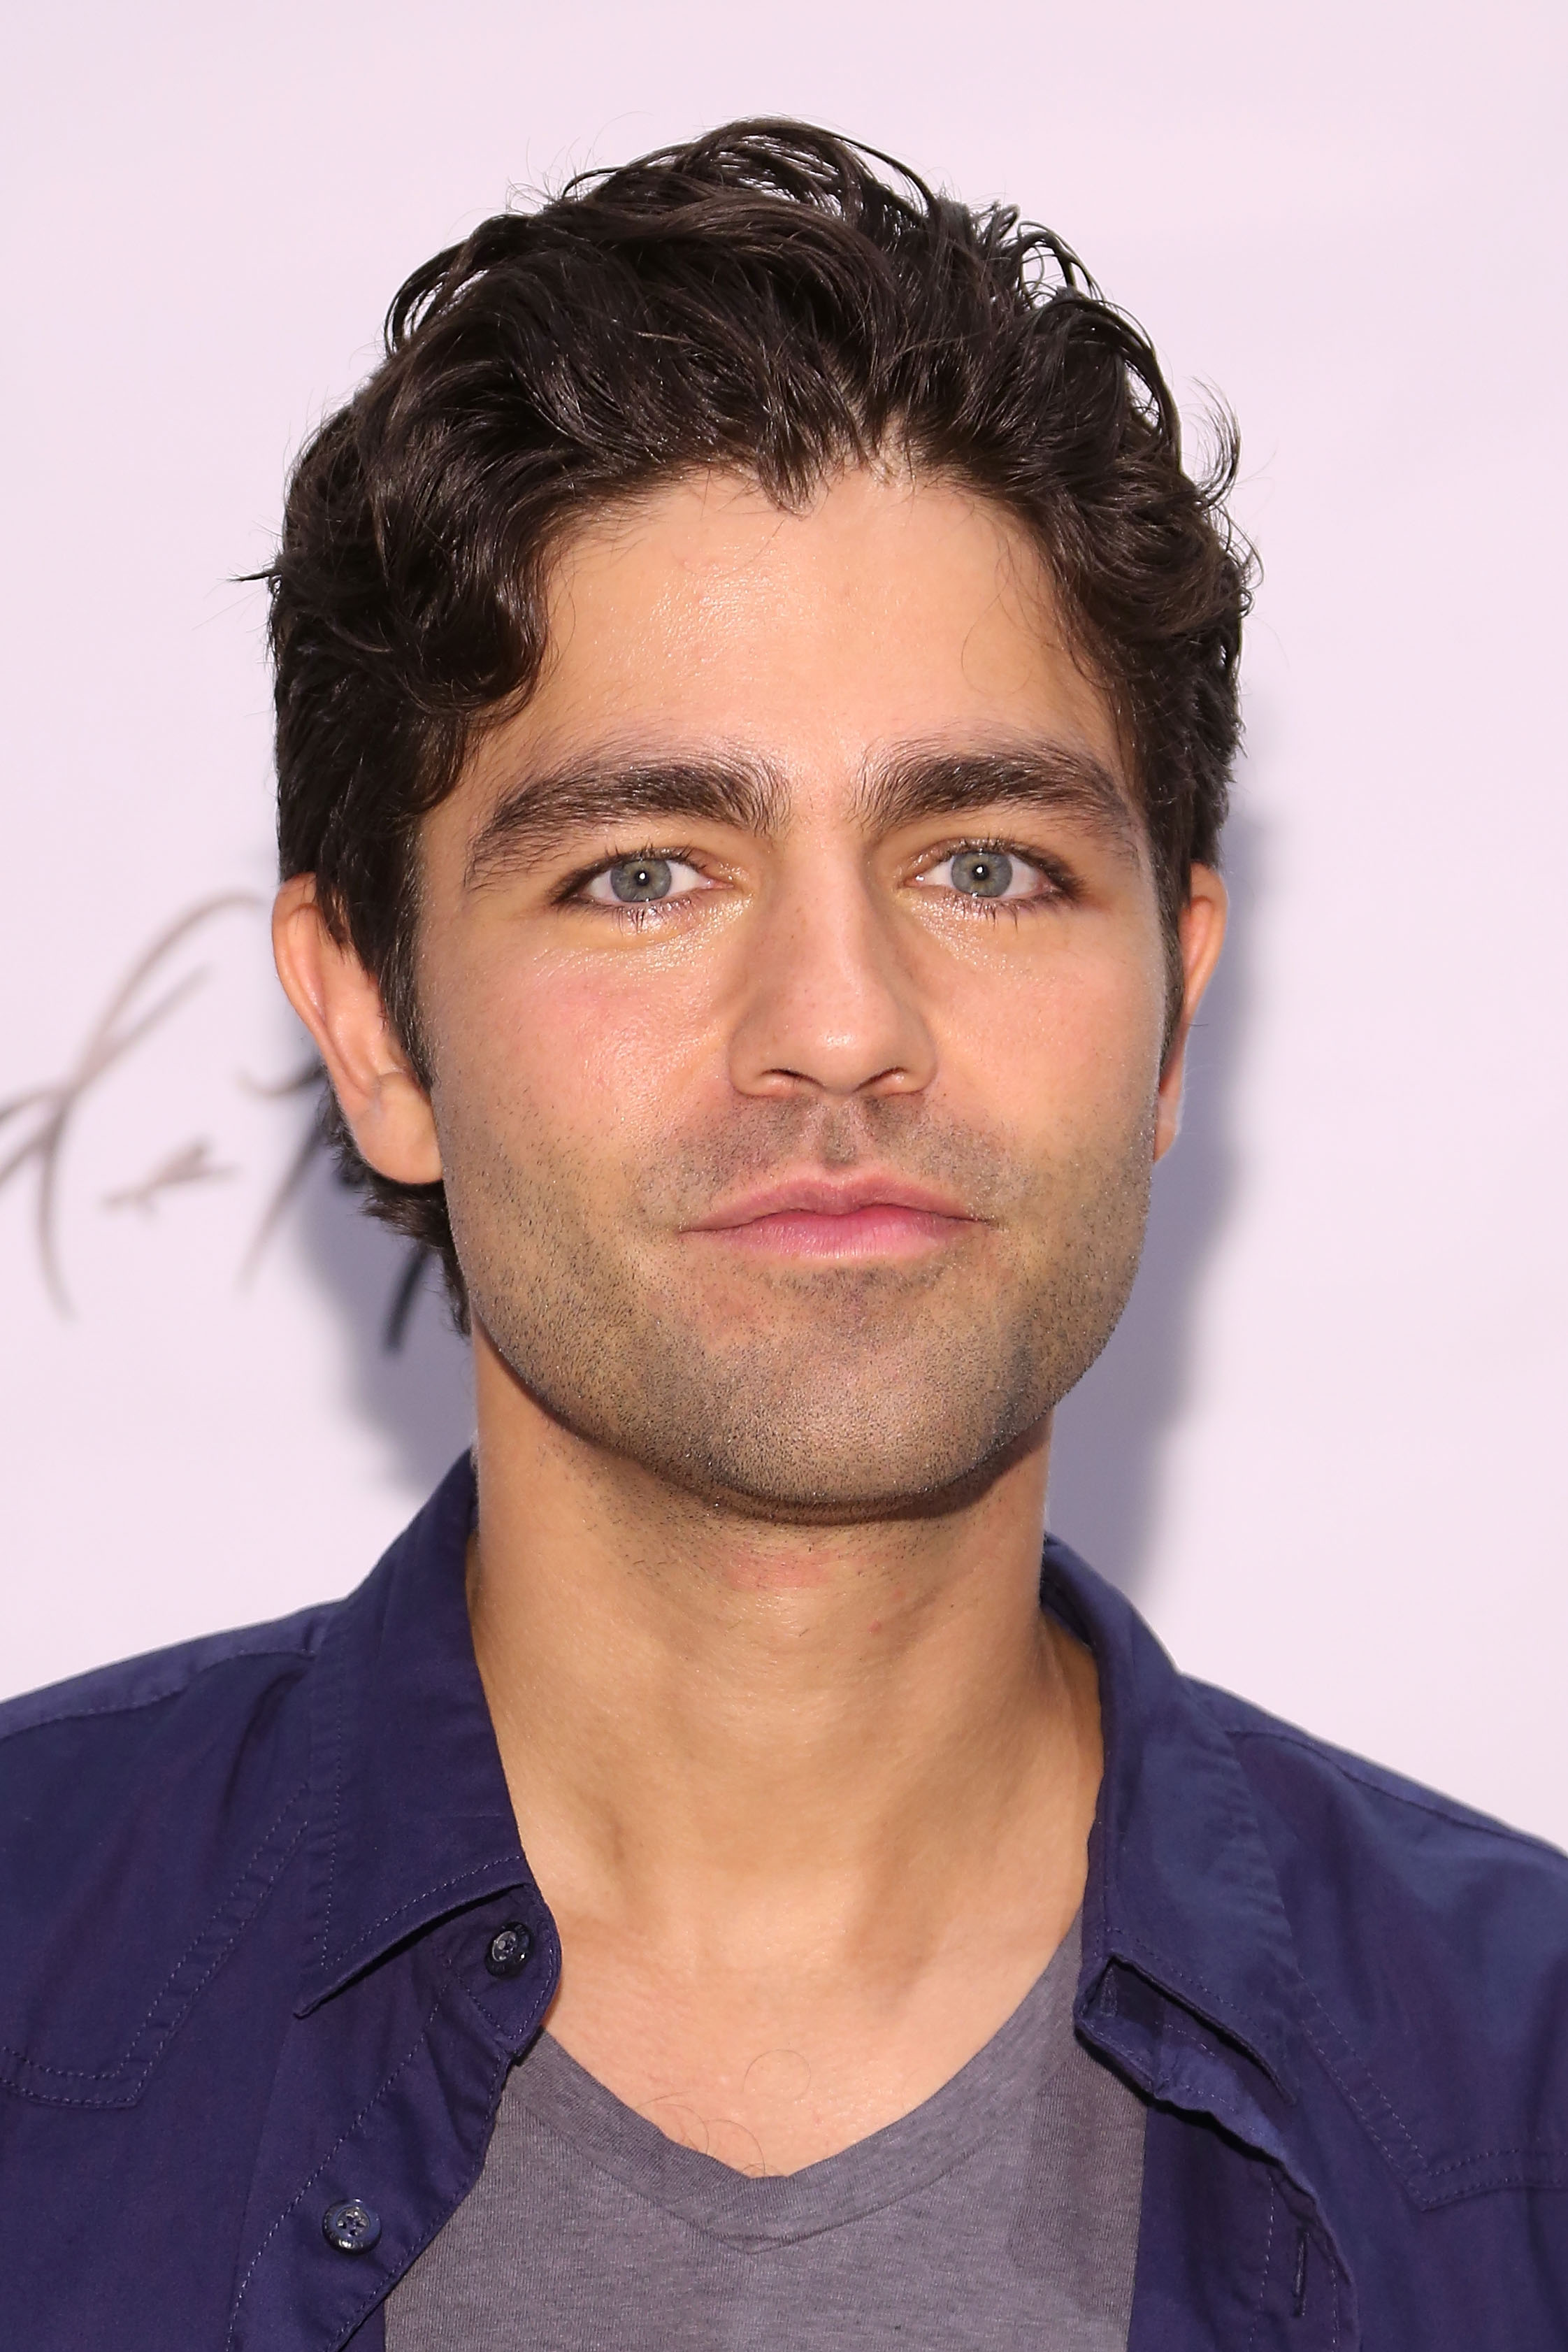 Actor Adrian Grenier at Lord & Taylor on May 11, 2015 in New York City.